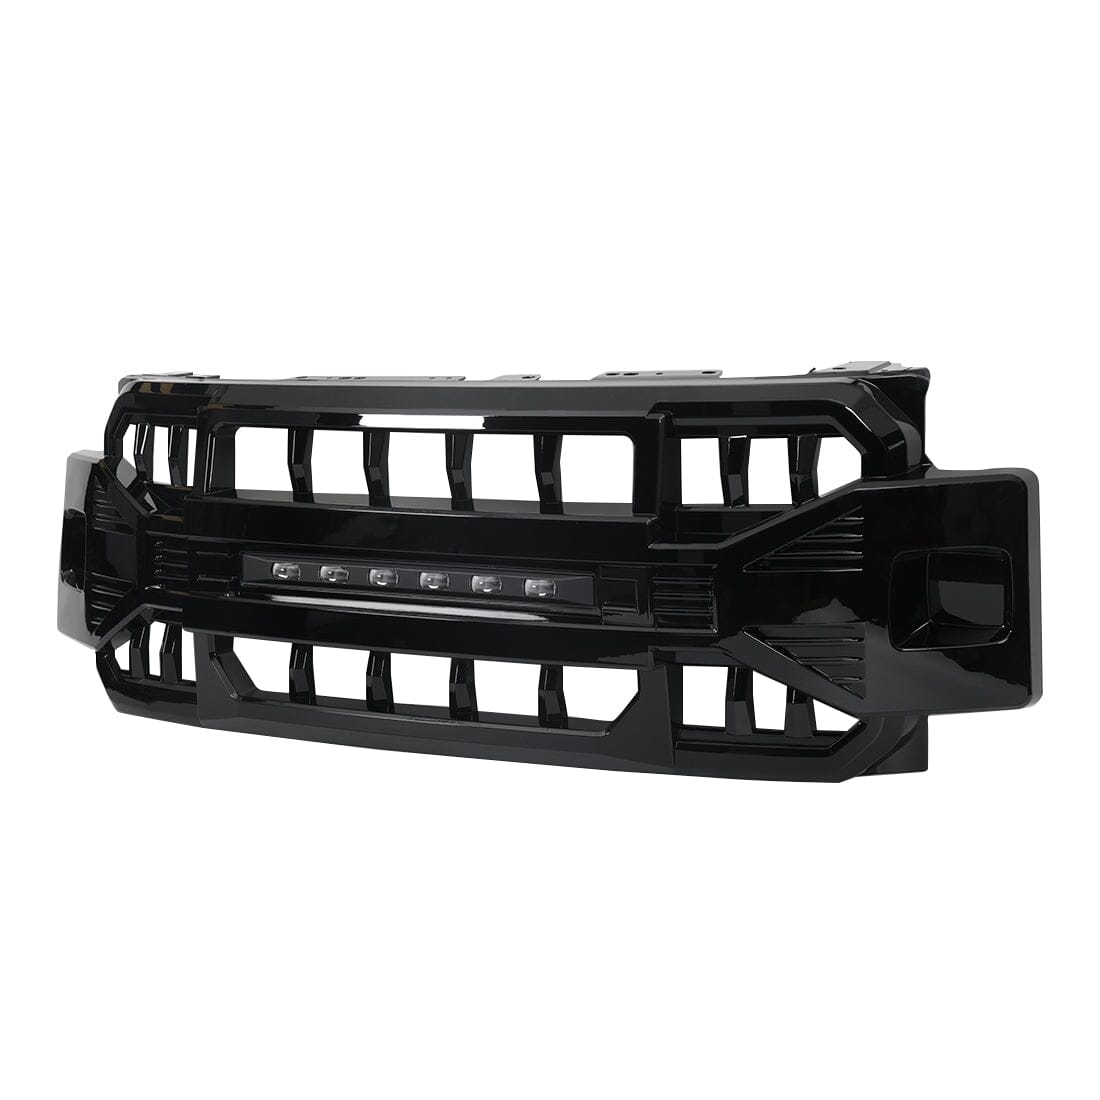 Armor Grille W/Off-Road Lights - Glossy Black For 2017-2019 Ford F250/350| Amoffroad